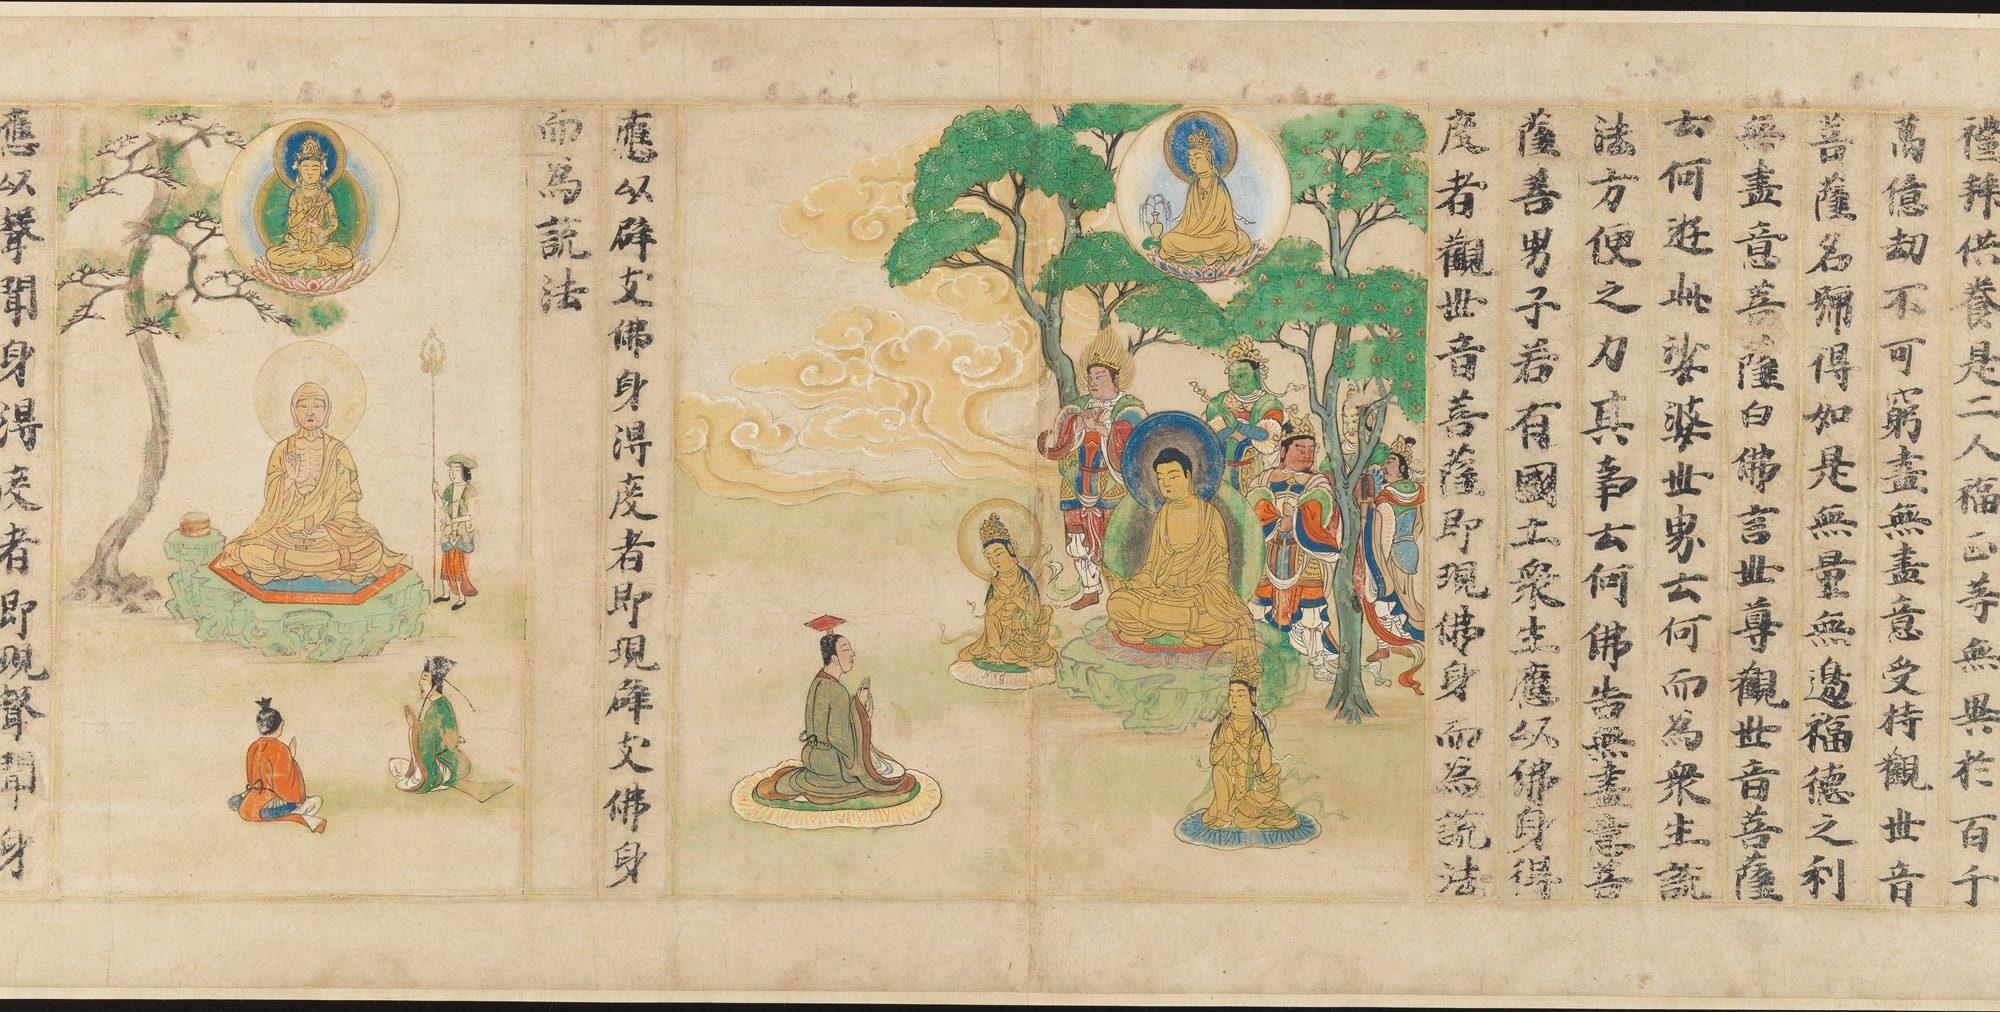 The Life of the Lotus Sutra